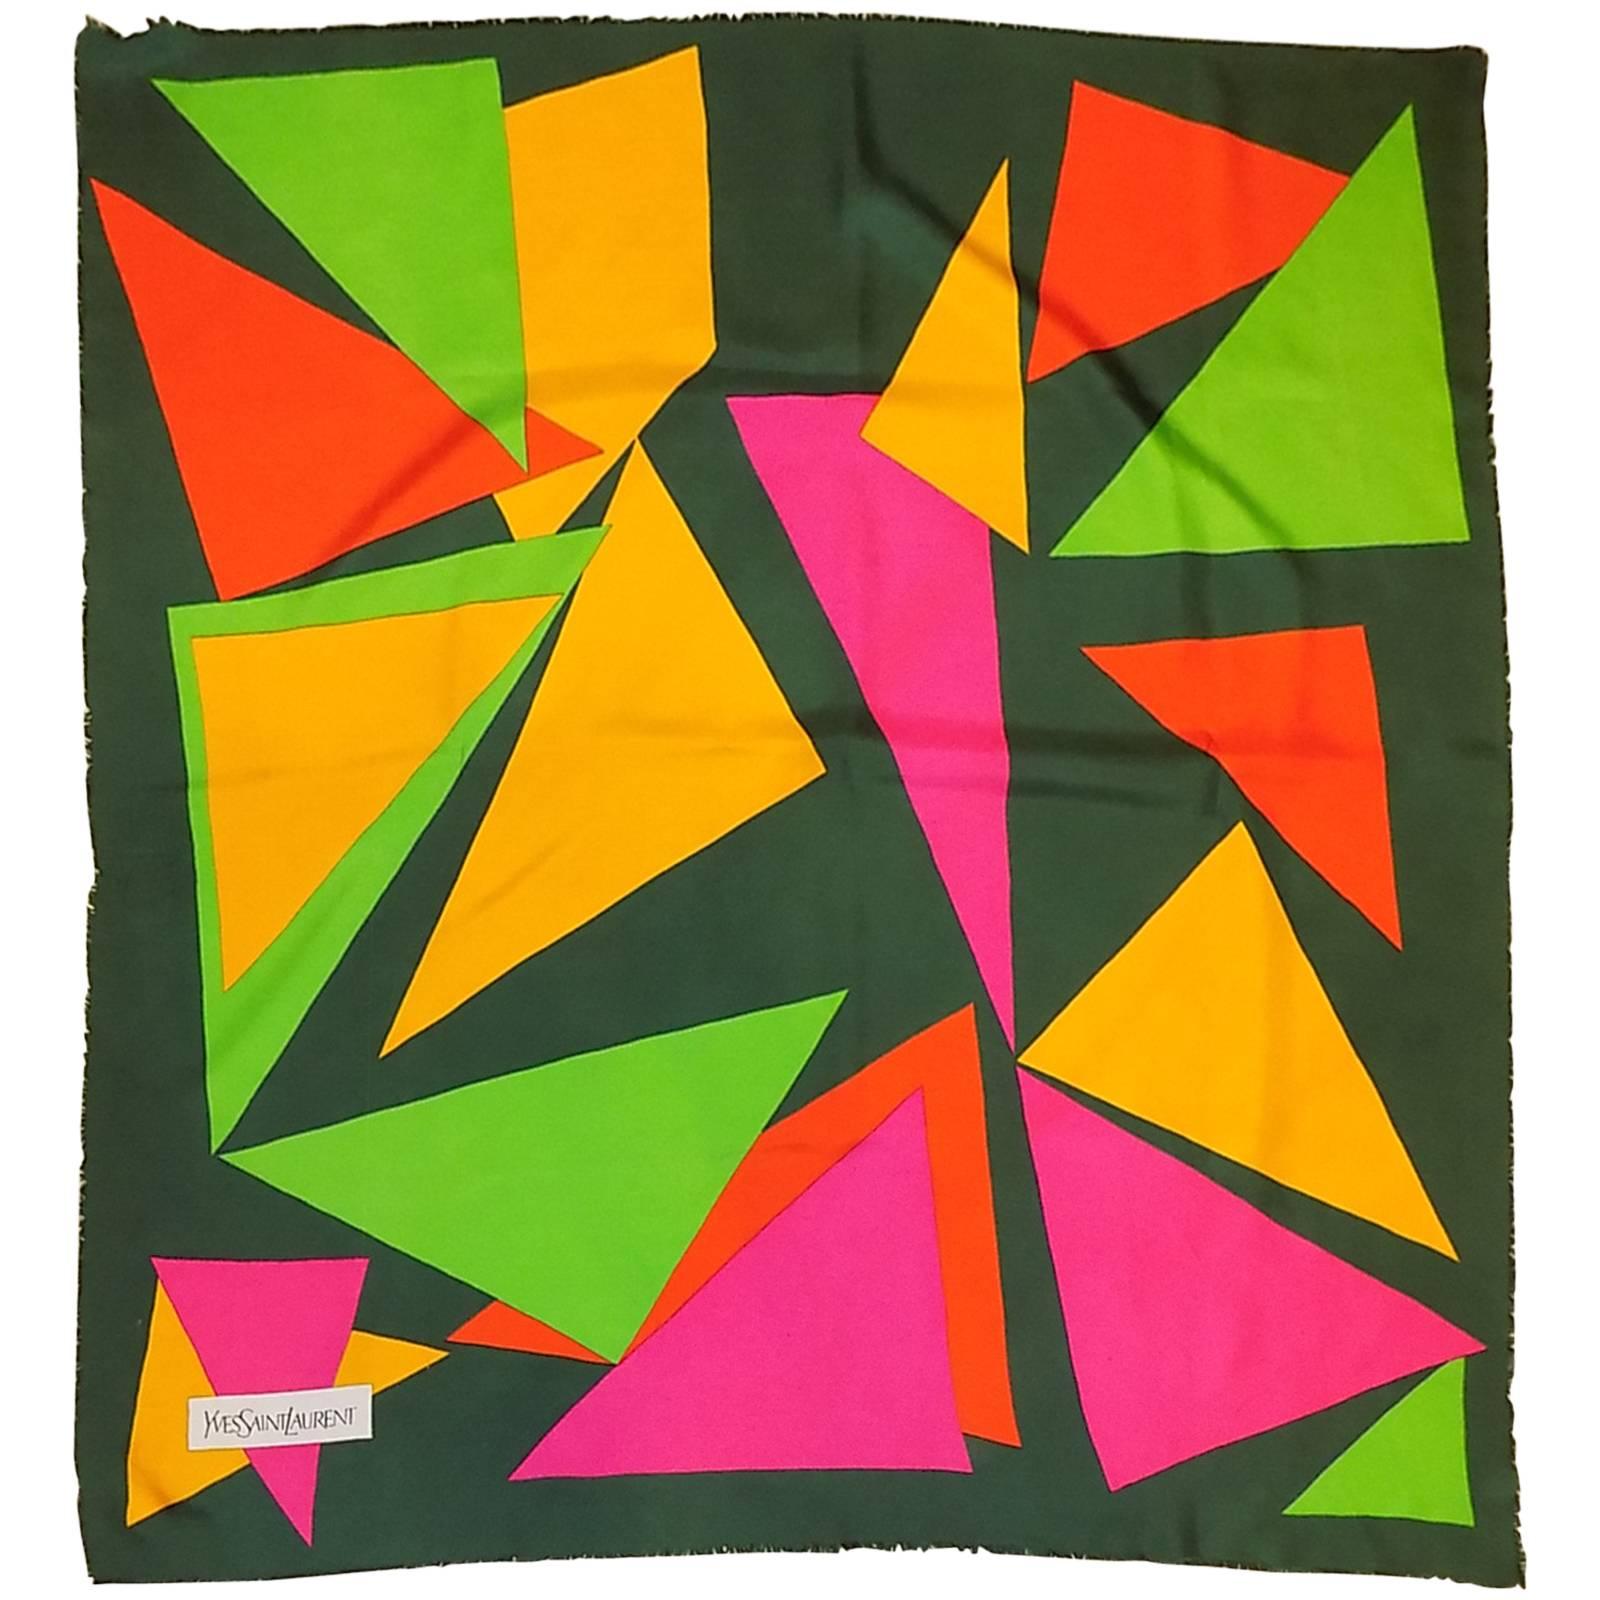 Vintage Yves Saint Laurent "Triangle" Scarf  Rare and Fabulous!!